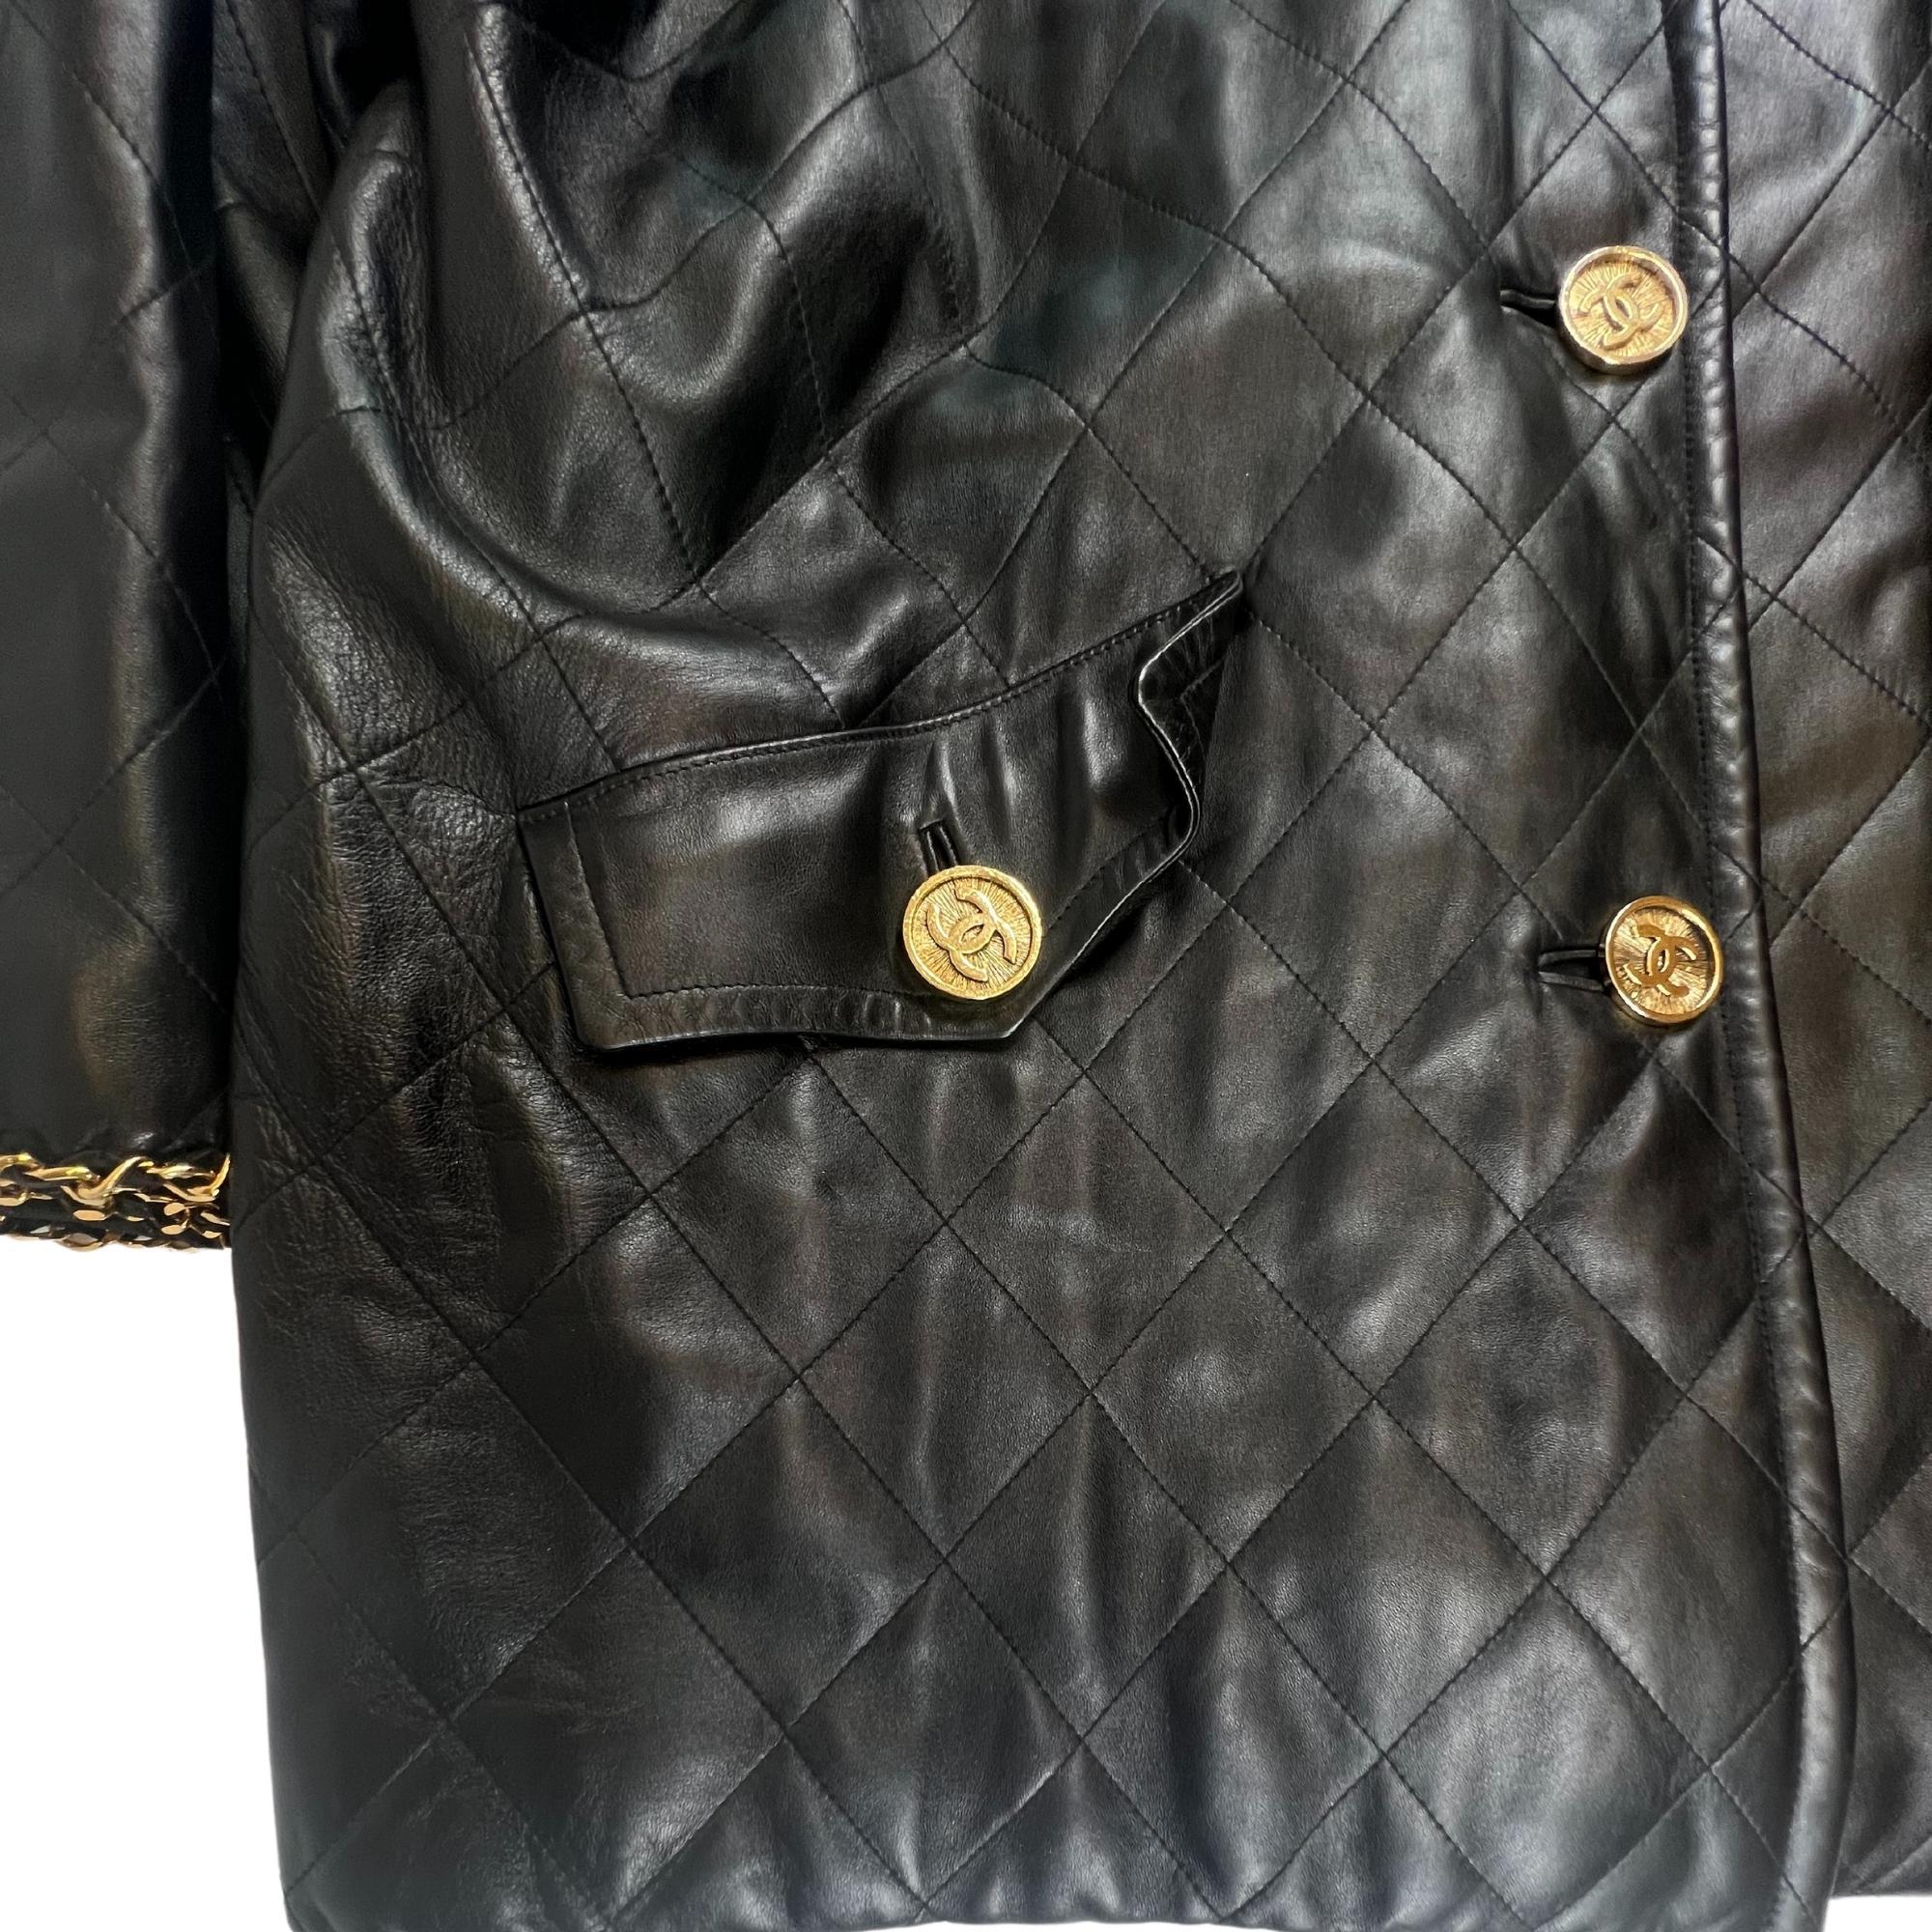 Chanel Vintage Black Lambskin Quilted Leather Swing Coat (FR44  Large) For Sale 4